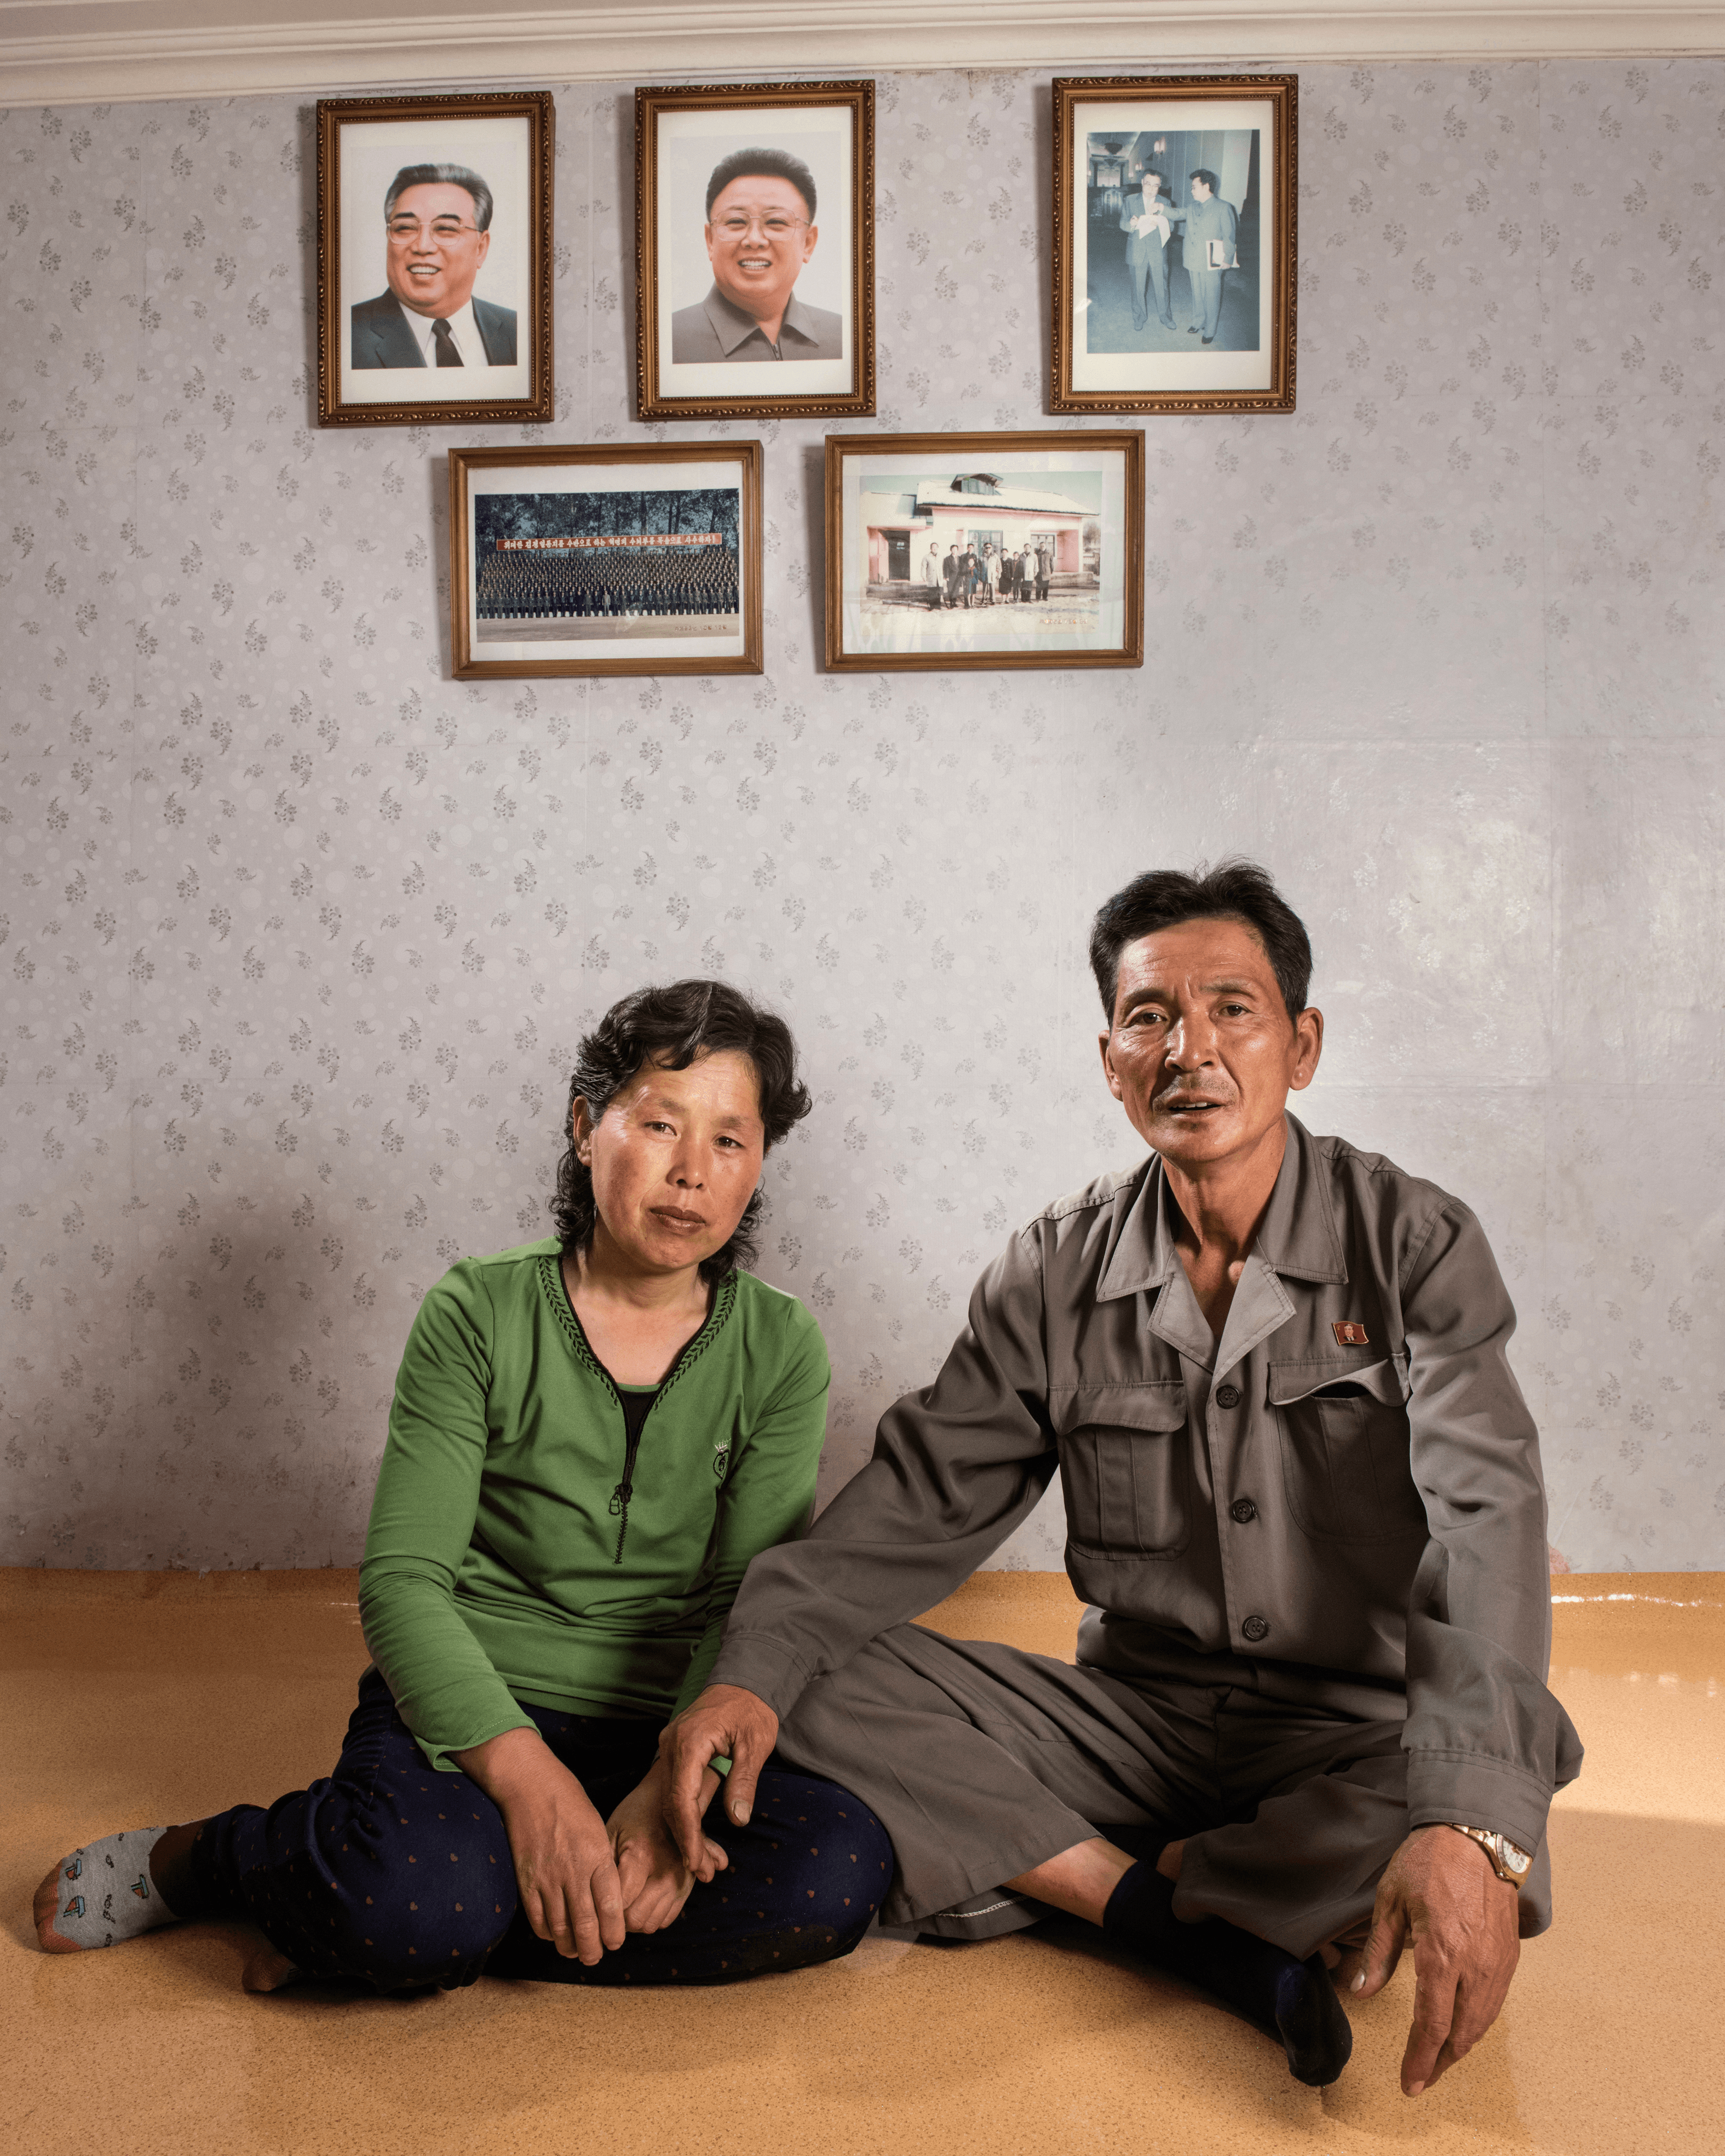 Couple At Home